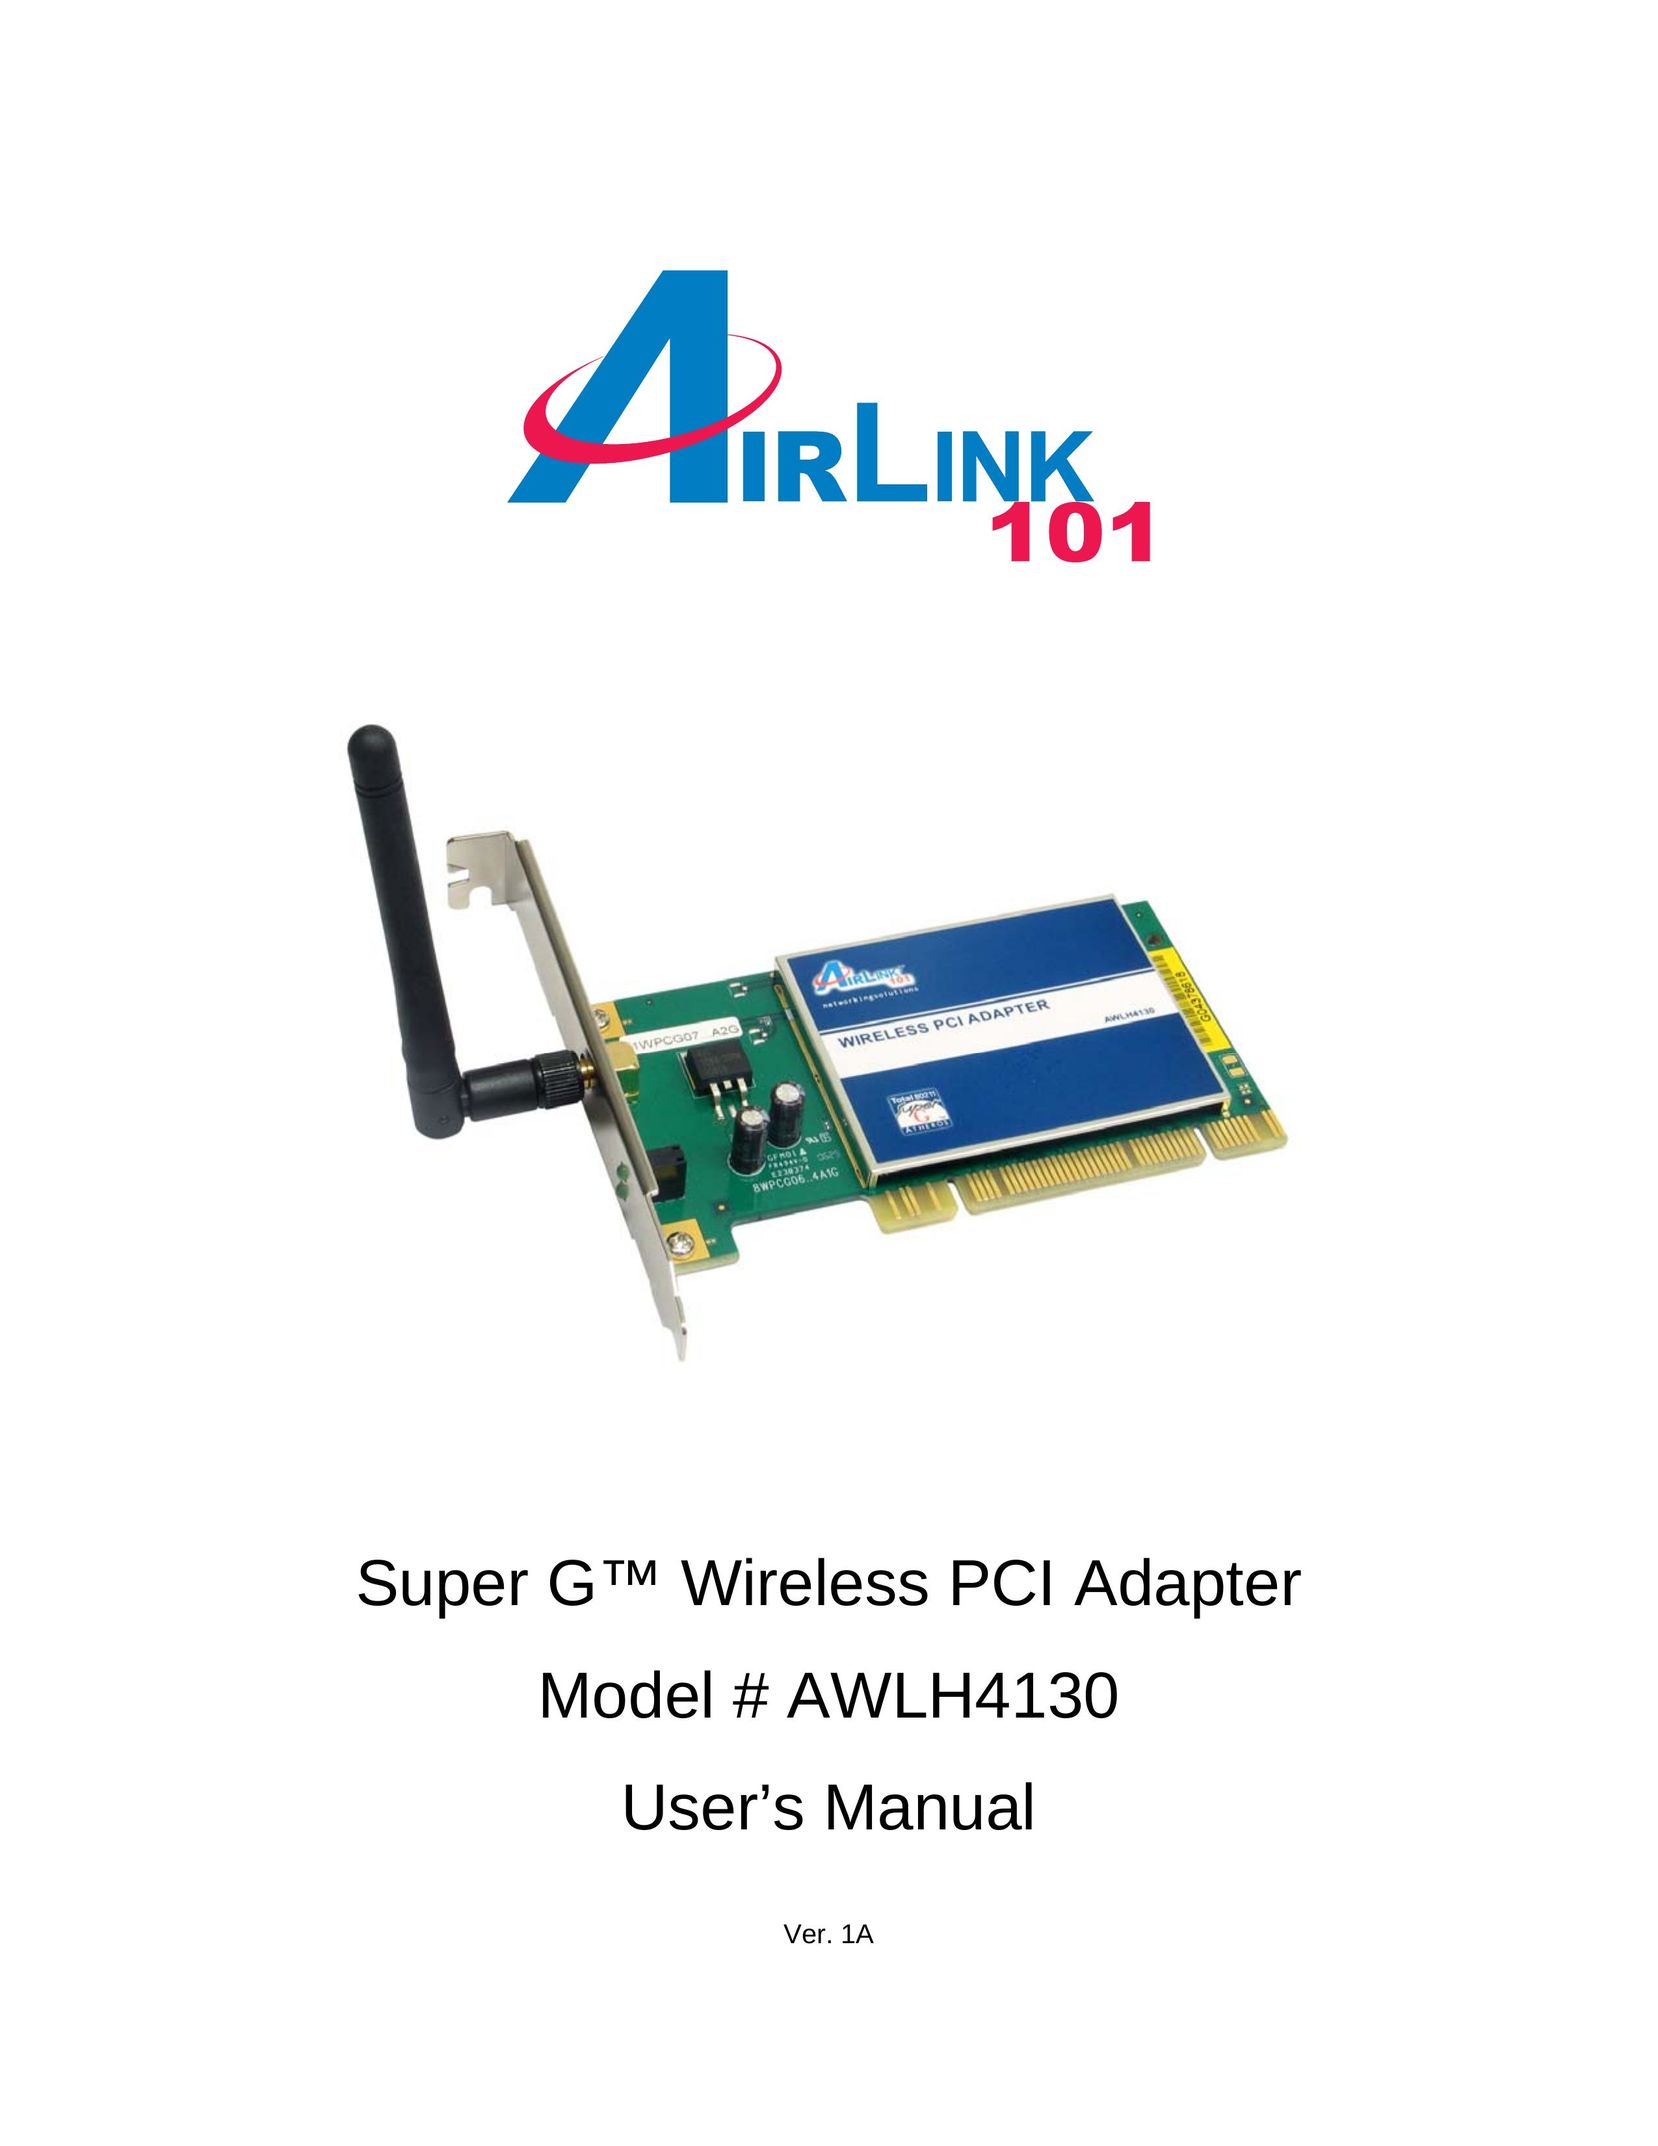 Airlink101 AWLH4130 Network Card User Manual